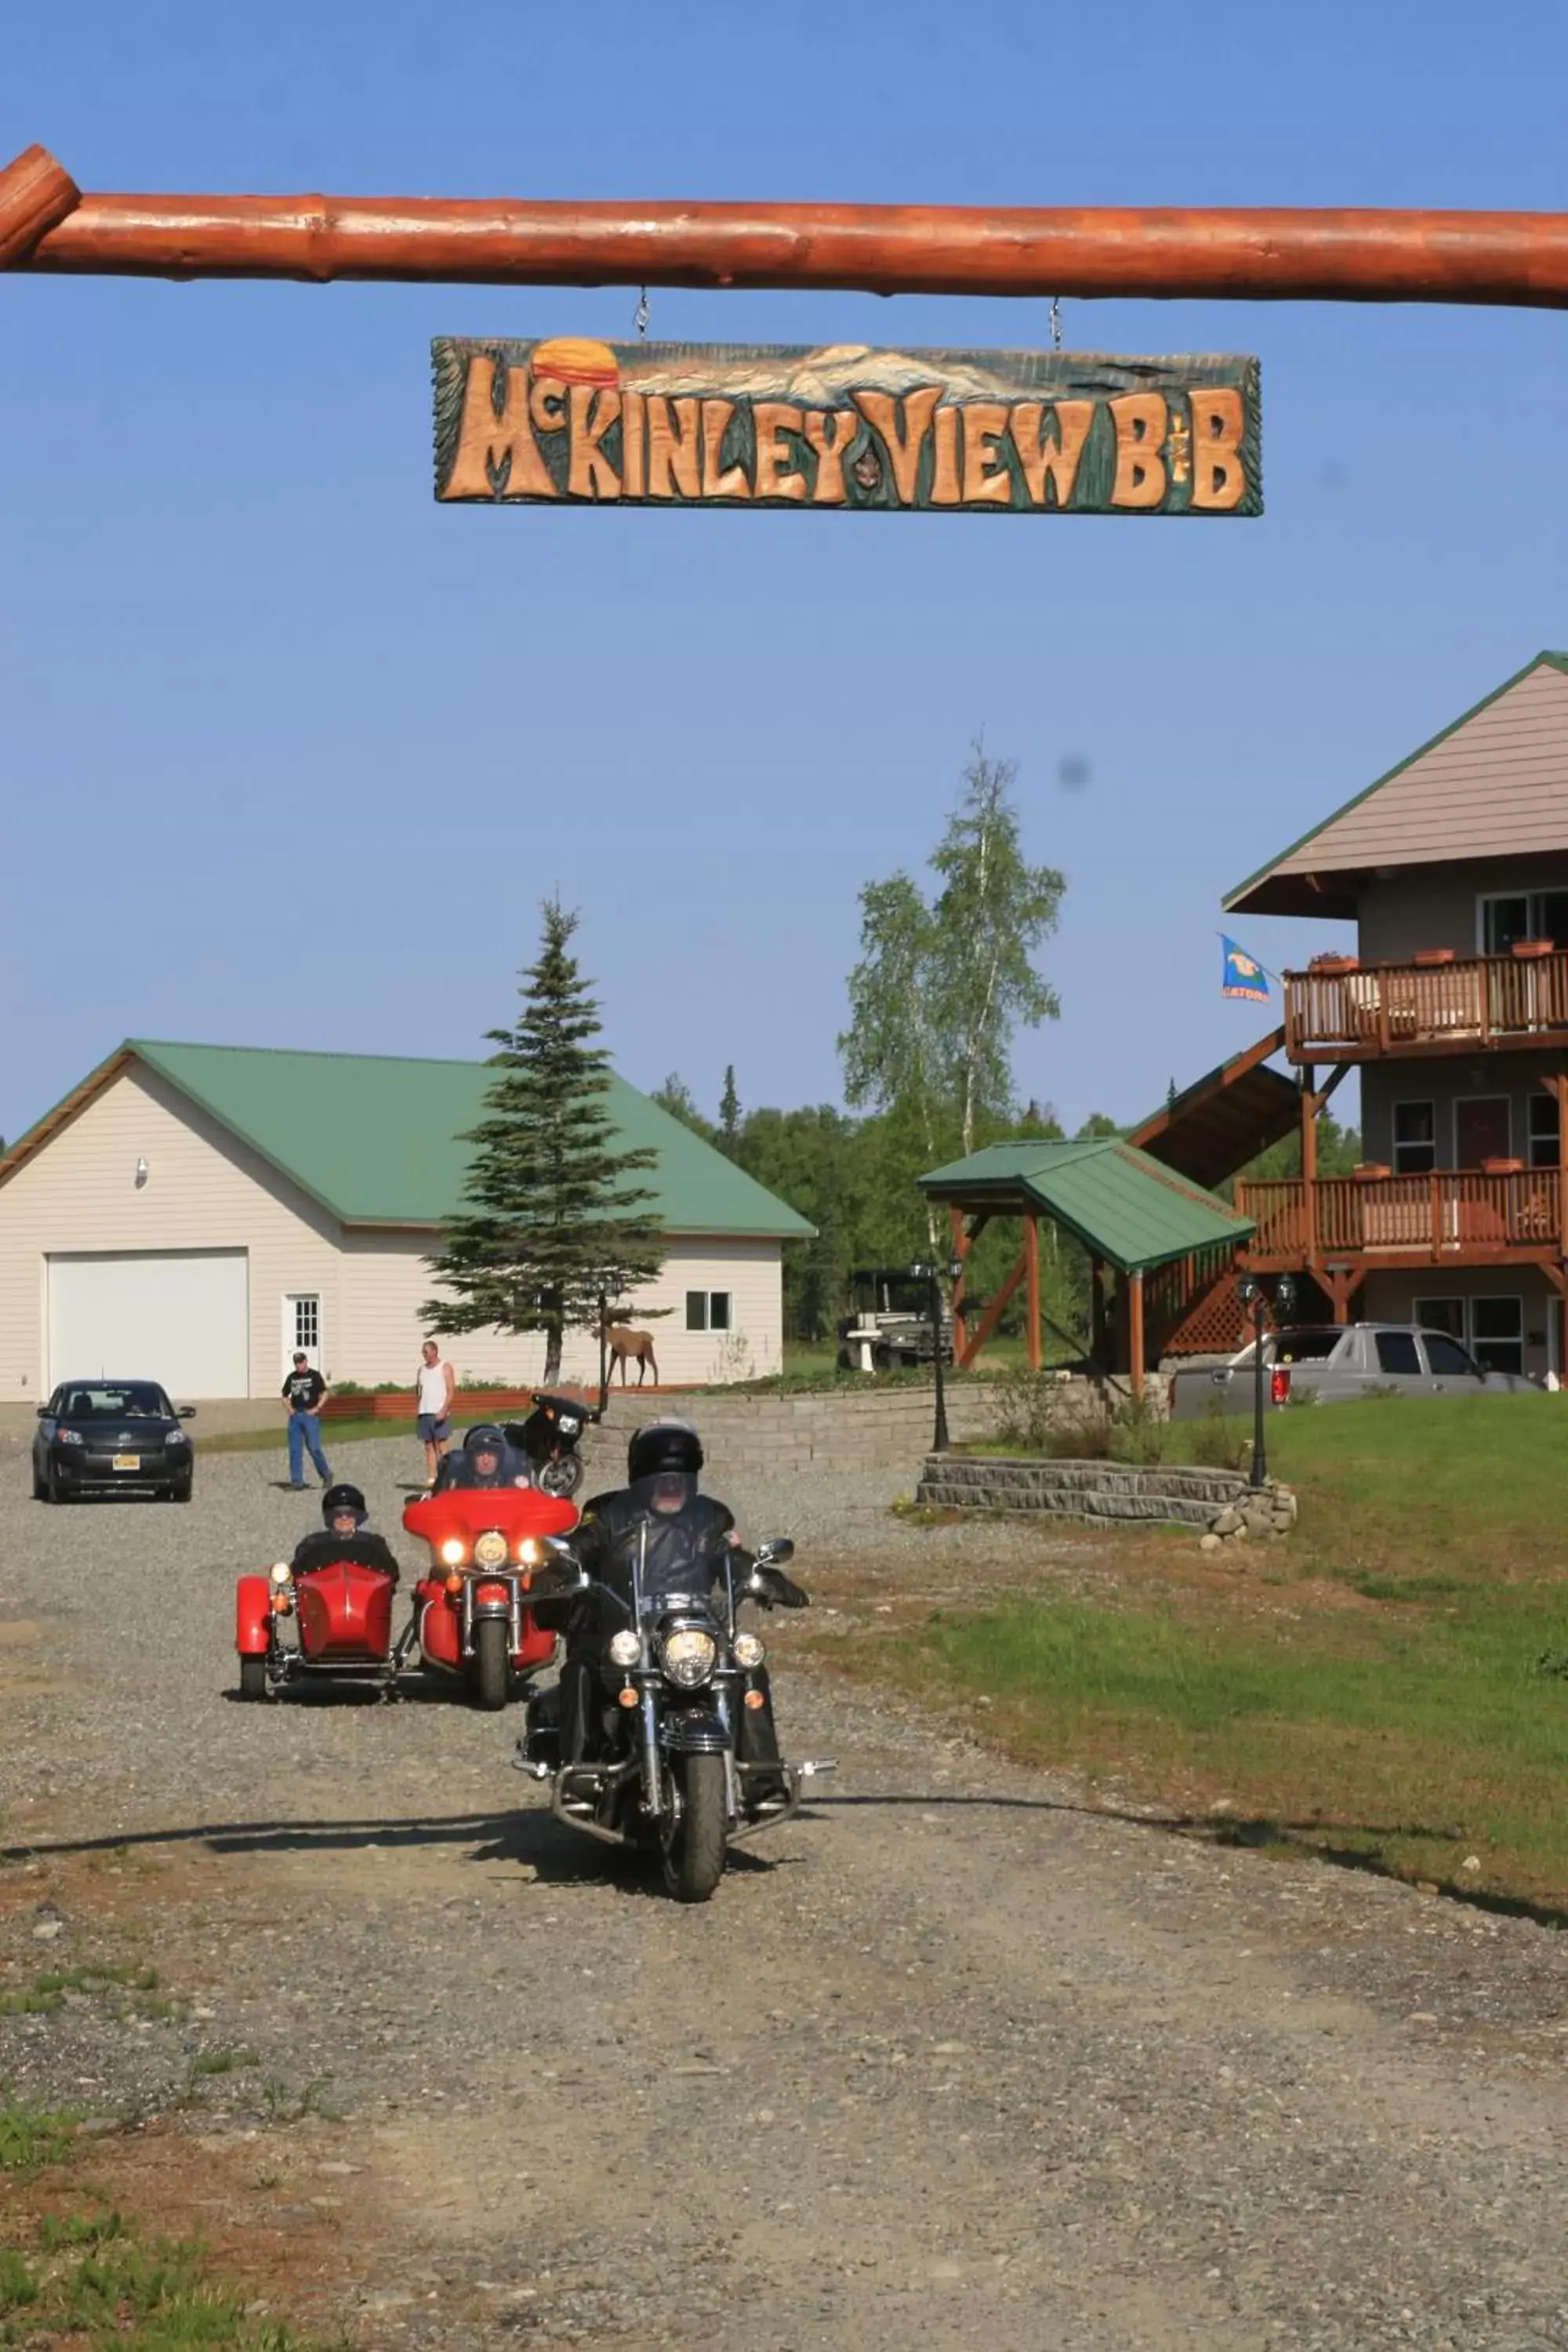 People in McKinley View B&B